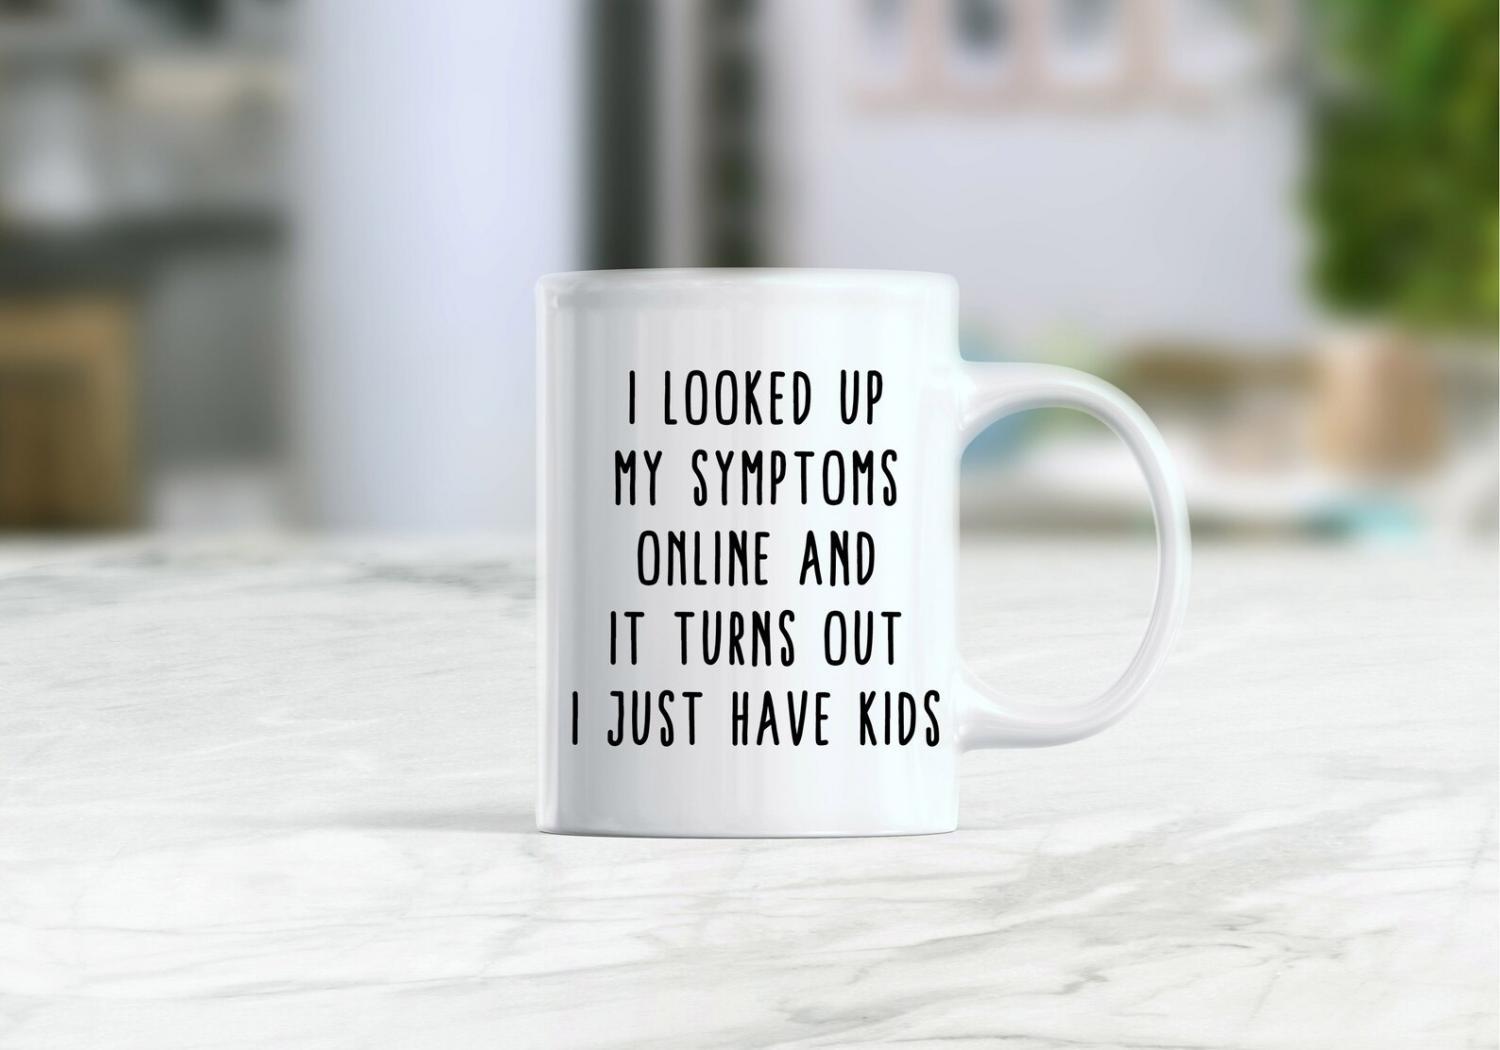 Black colored 'I Looked Up My Symptoms Online And It Turns Out I Just Have Kids' written on a white mug with white handle